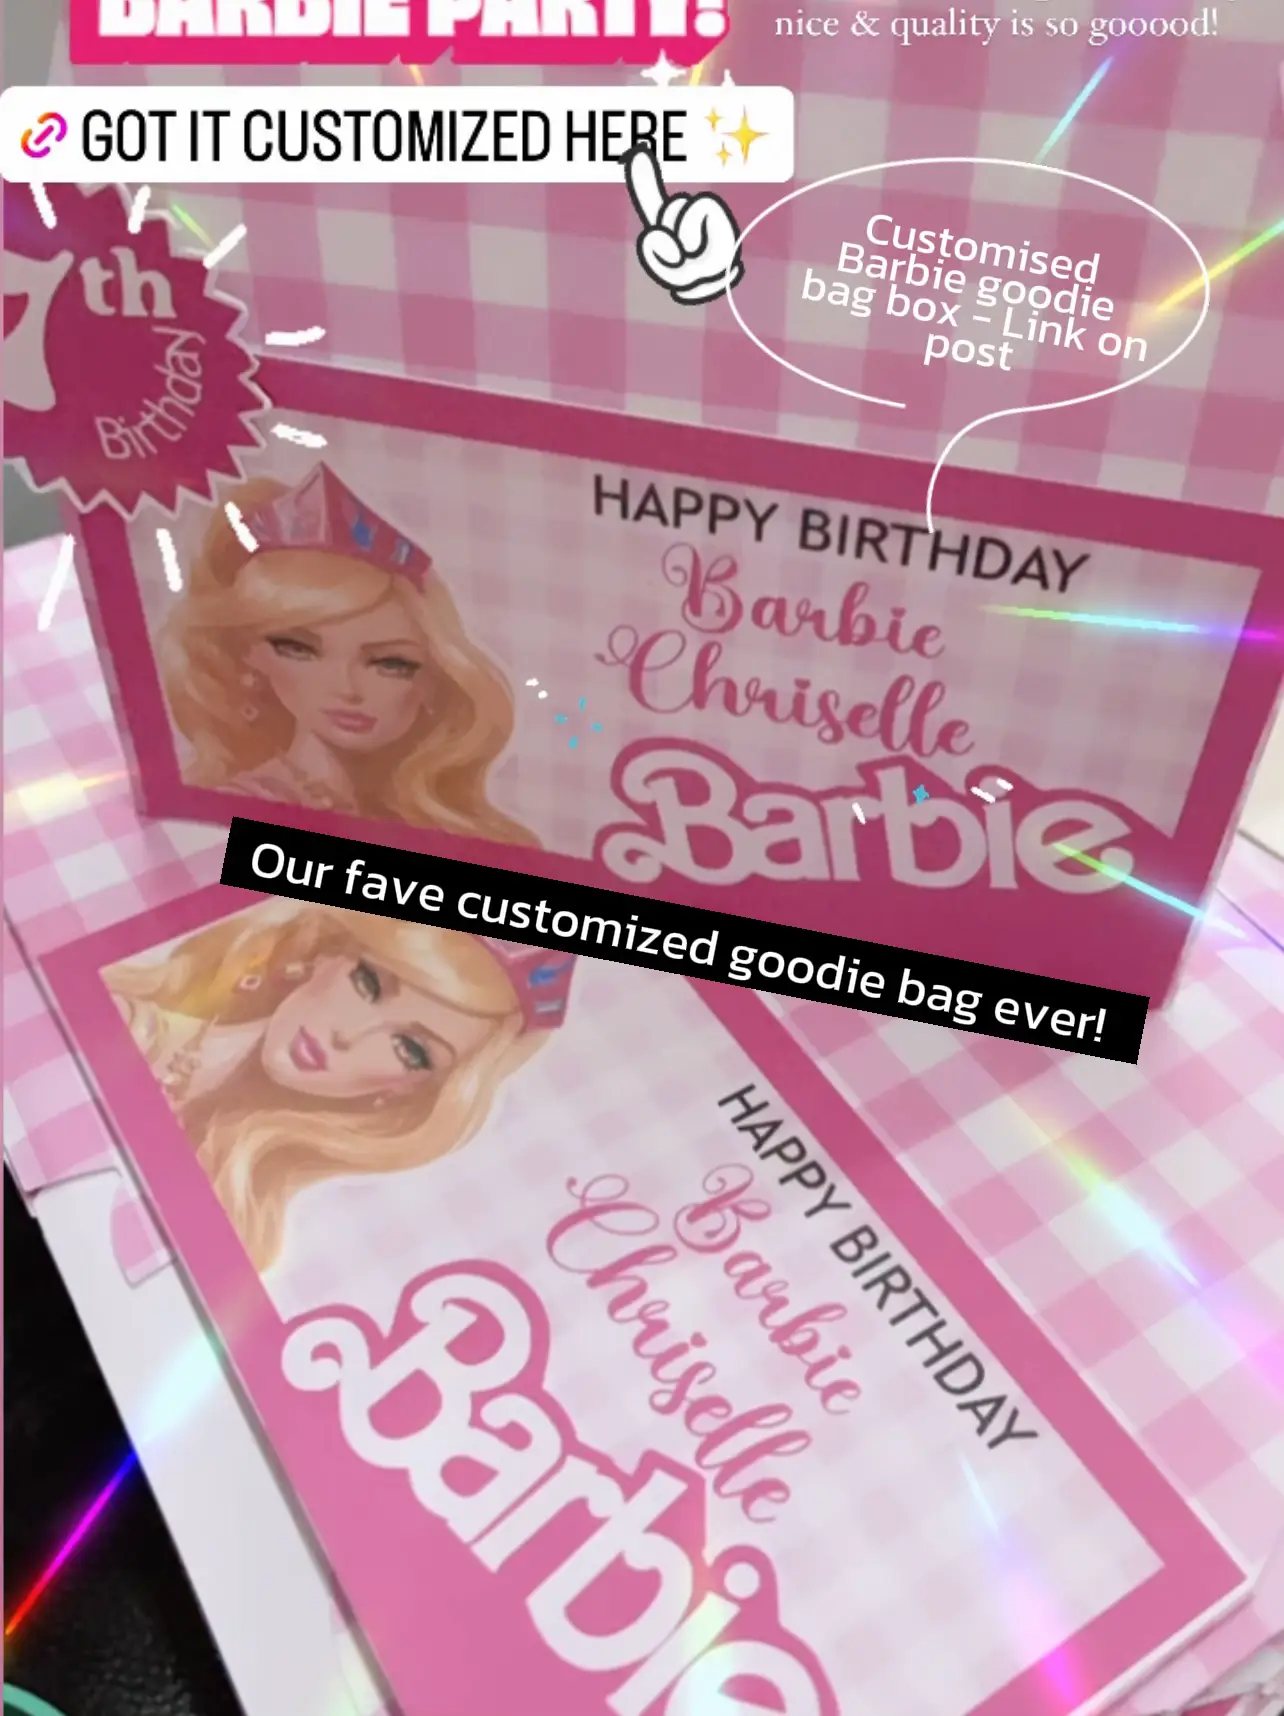 Barbie Dream Together Create Your Own Bag